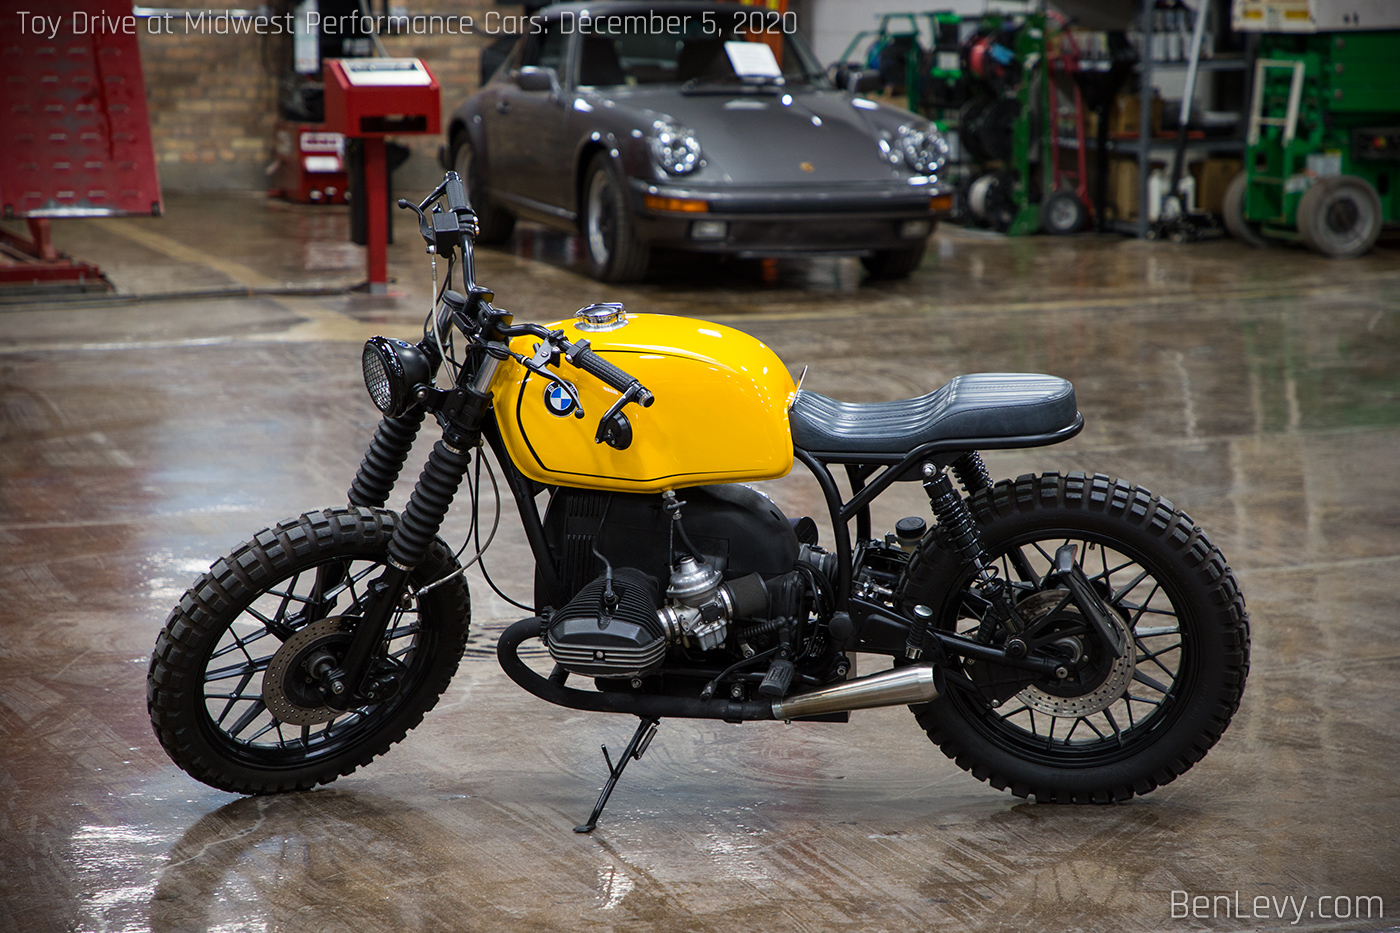 Restored BMW Motorcycle at Midwest Performance Cars - BenLevy.com